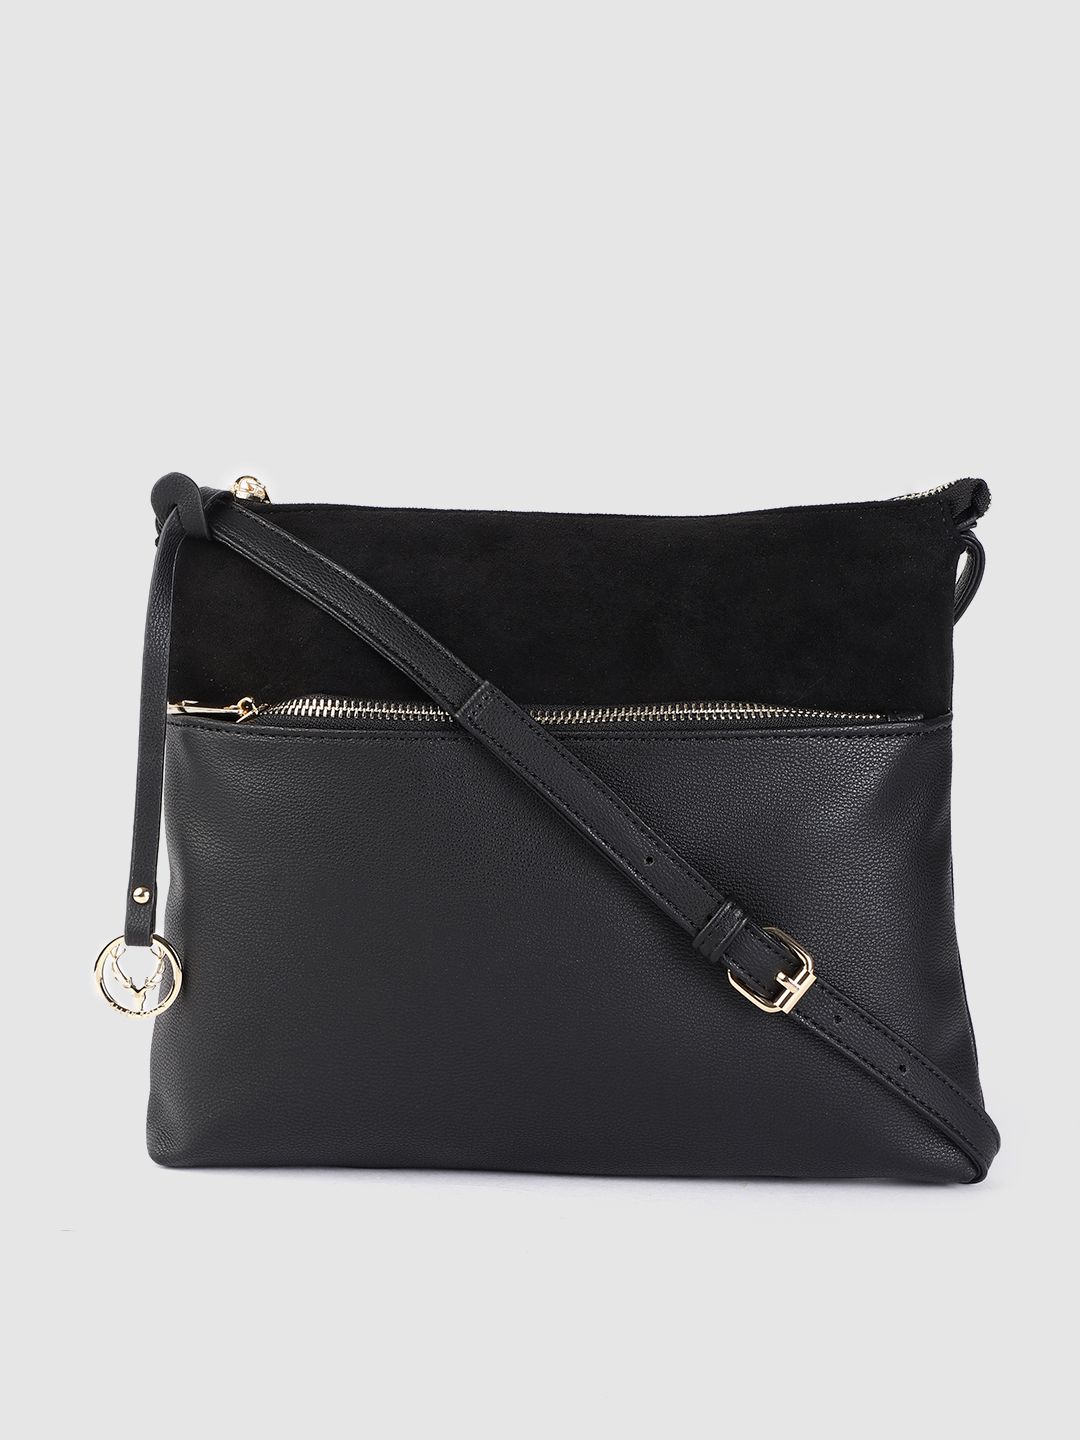 Allen Solly Black PU Structured Sling Bag Price in India